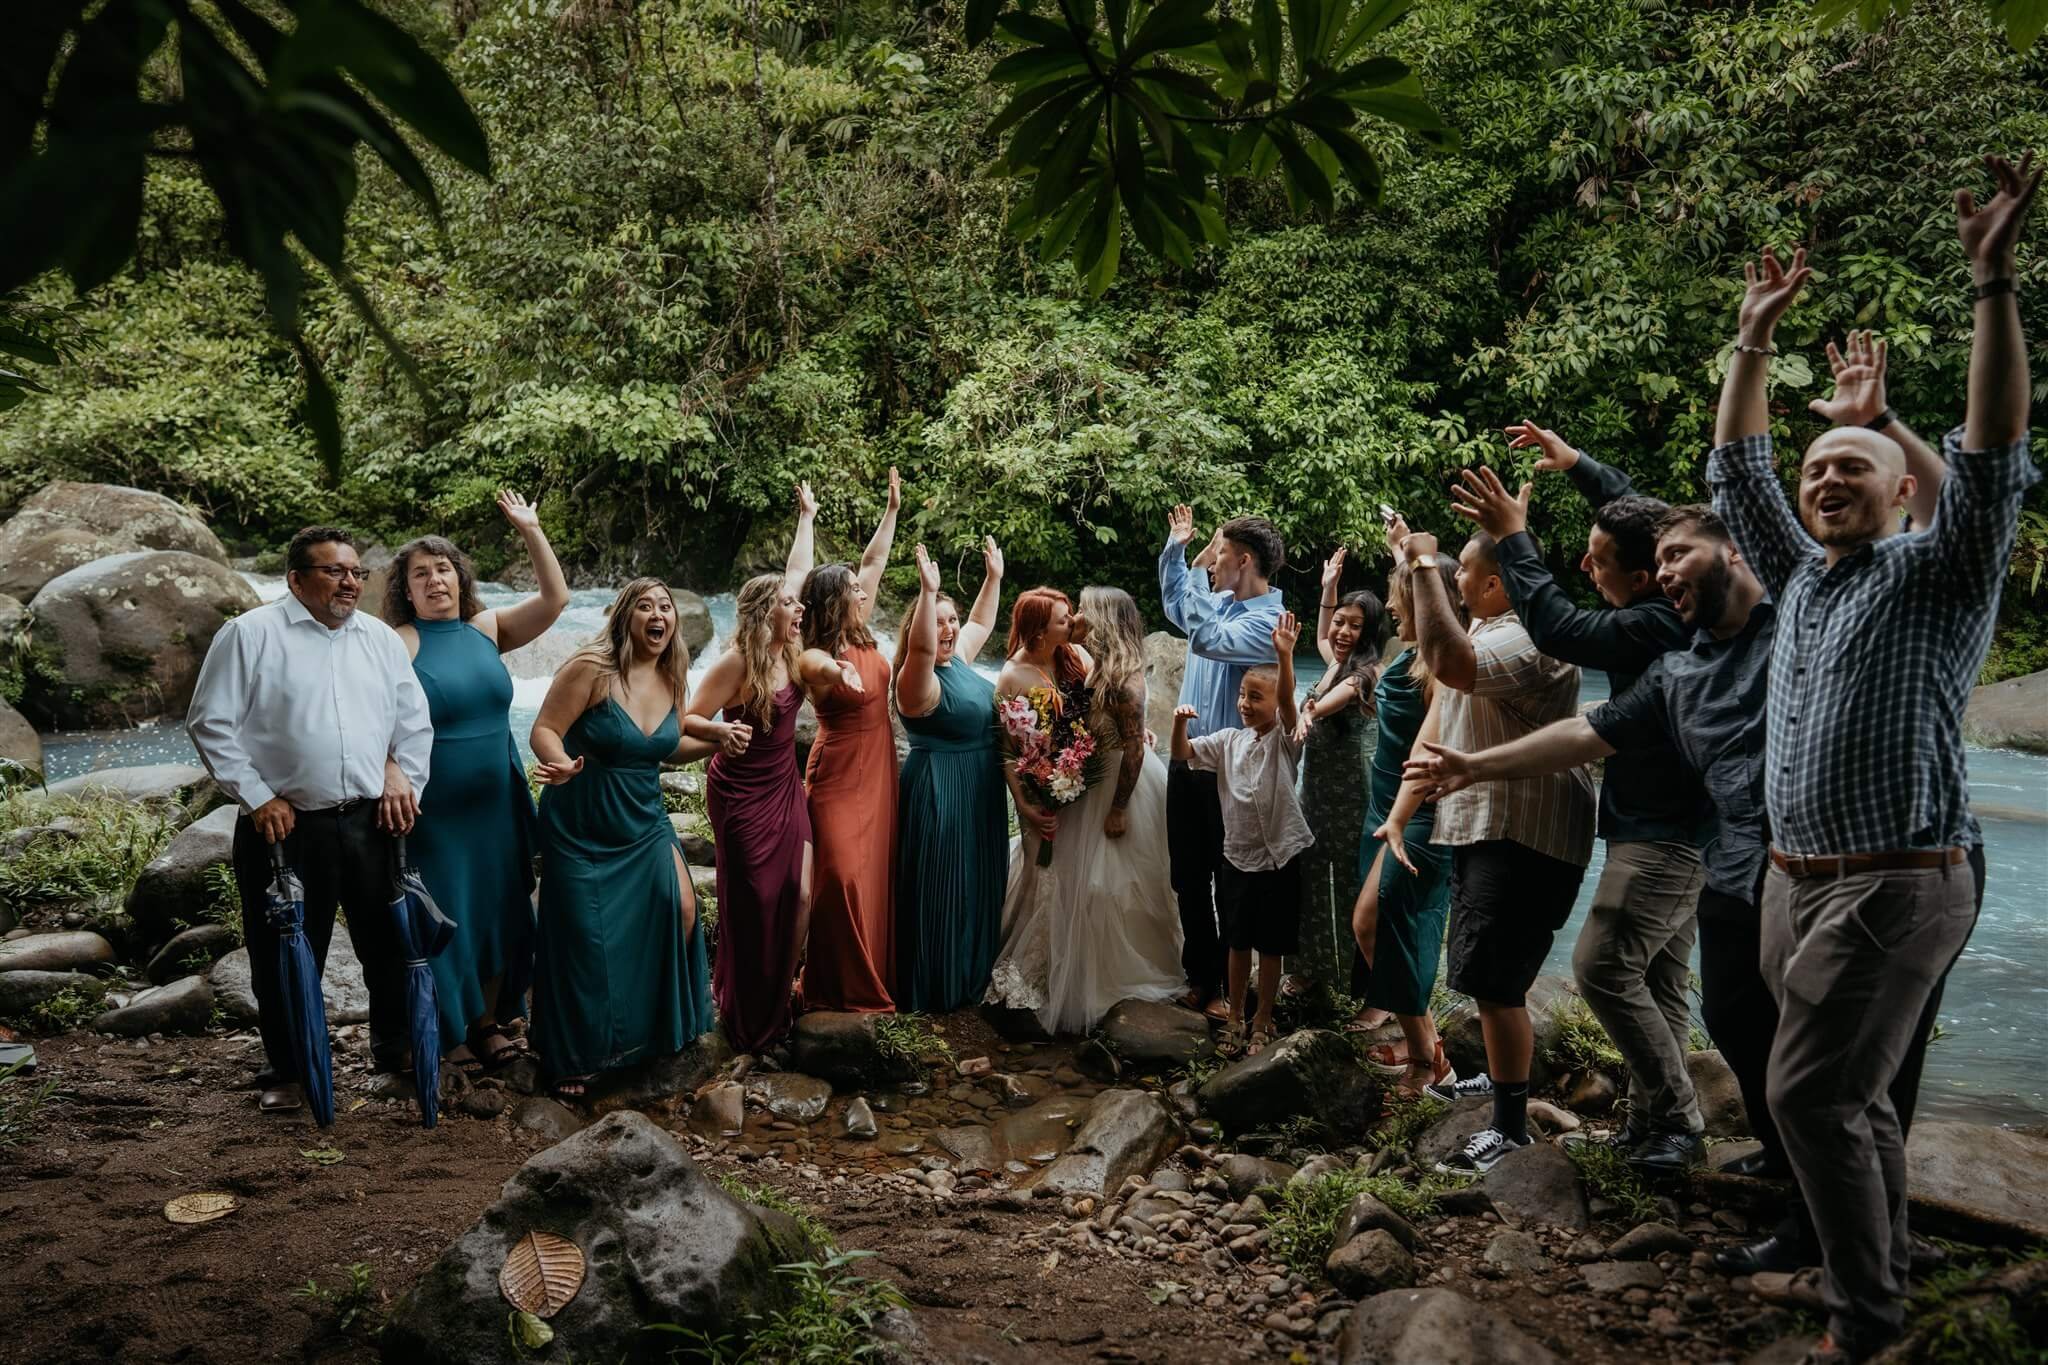 Guests cheer while brides kiss after adventure wedding ceremony